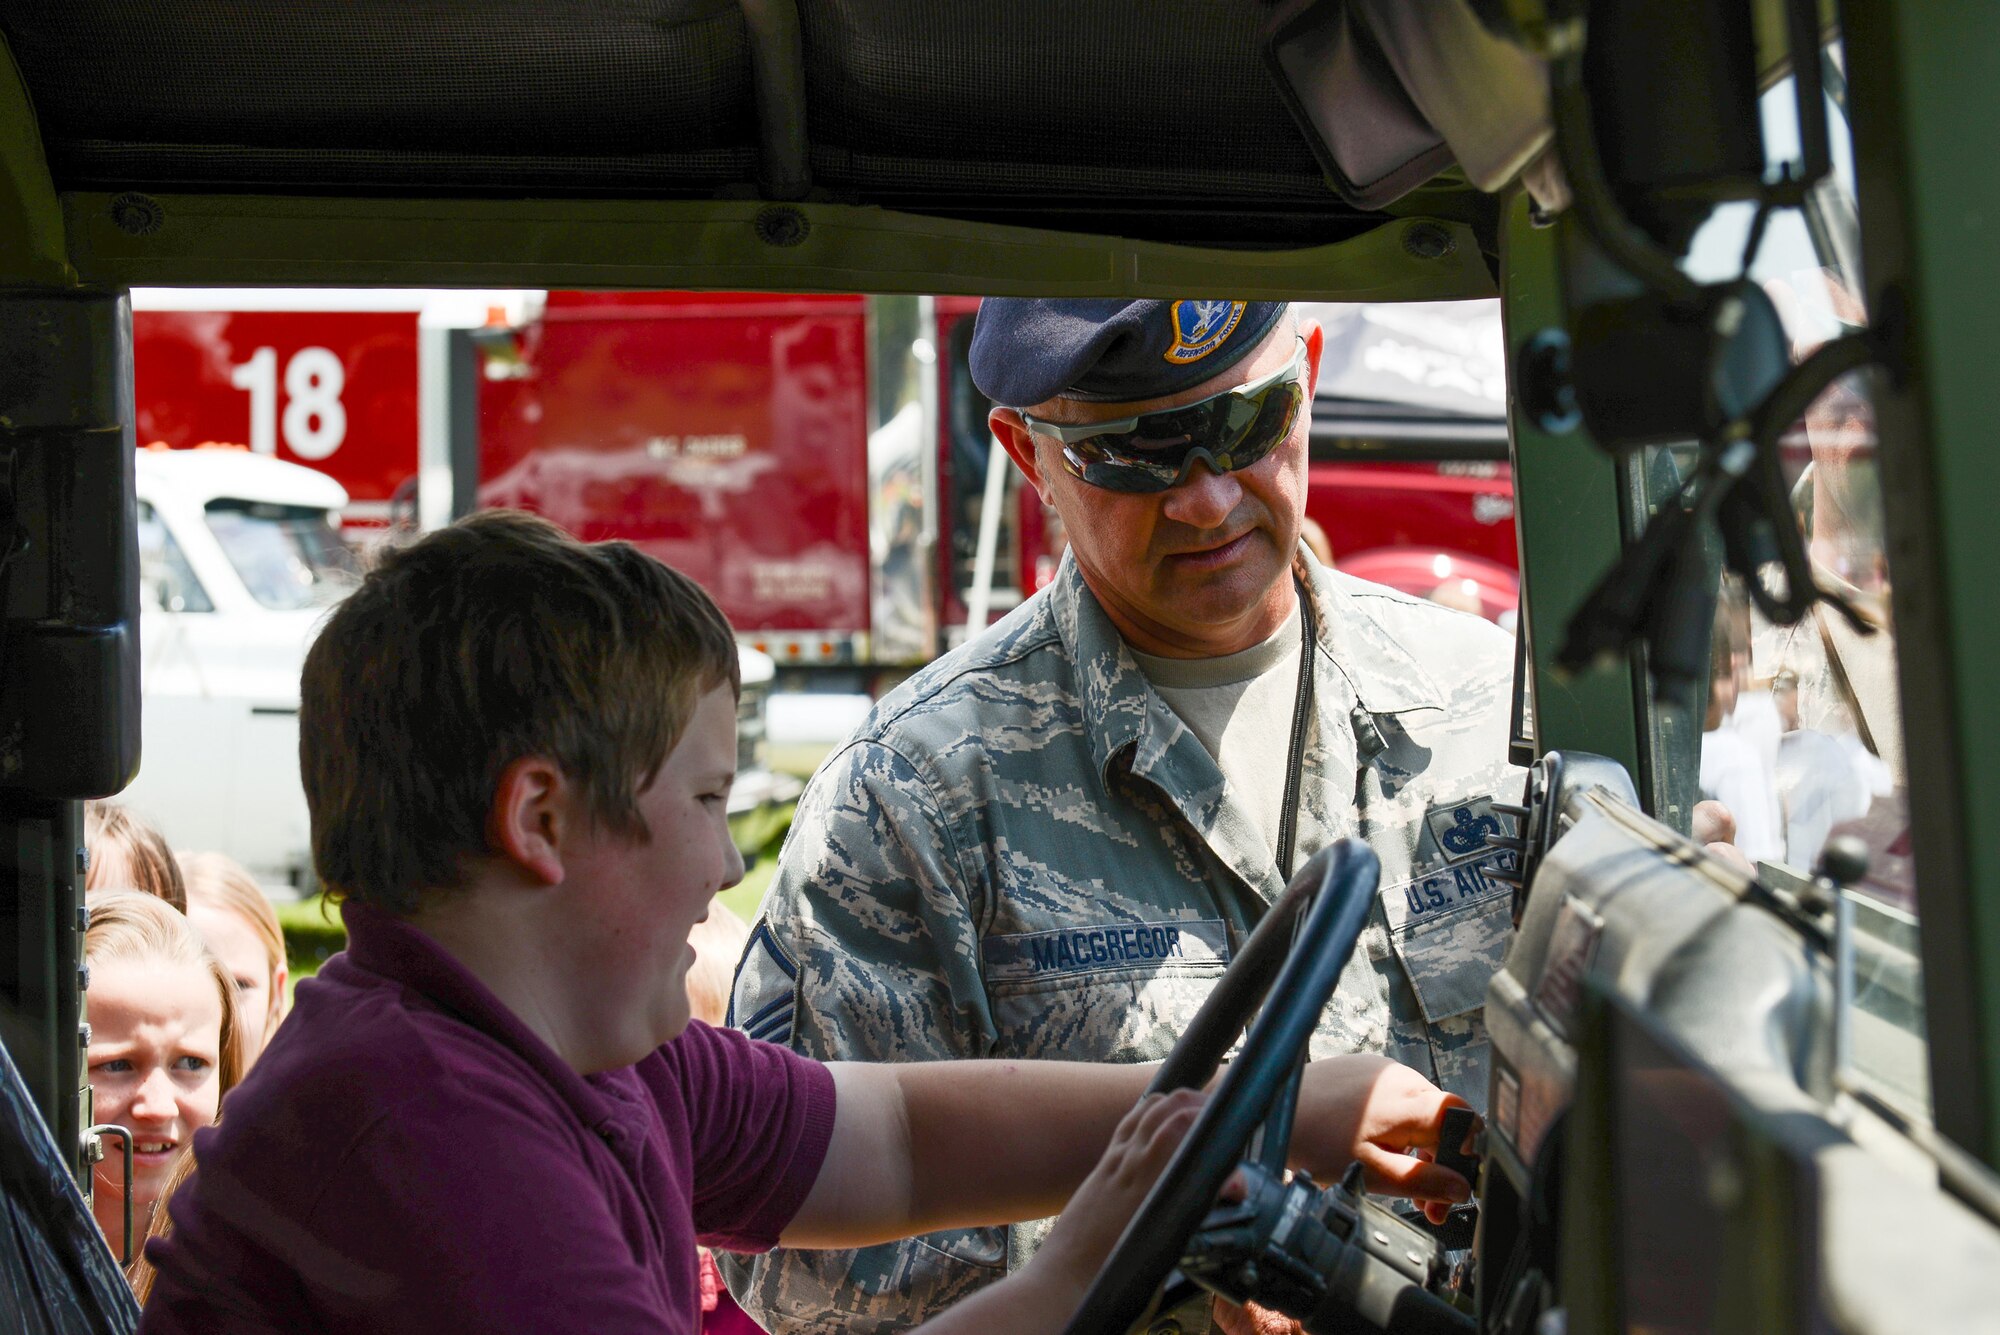 U.S. Air National Guard Master Sgt. Joseph MacGregor, 165th Airlift Wing Security Forces Squadron, shows a student the interior of a HUMVEE vehicle, May 10, 2013 at Sand Hill Elementary in Guyton, Ga. MacGregor answered questions about Air Force Law Enforcement during the annual transportation/career day.(U.S. Air National Guard photo by Tech. Sgt. Charles Delano/Released)